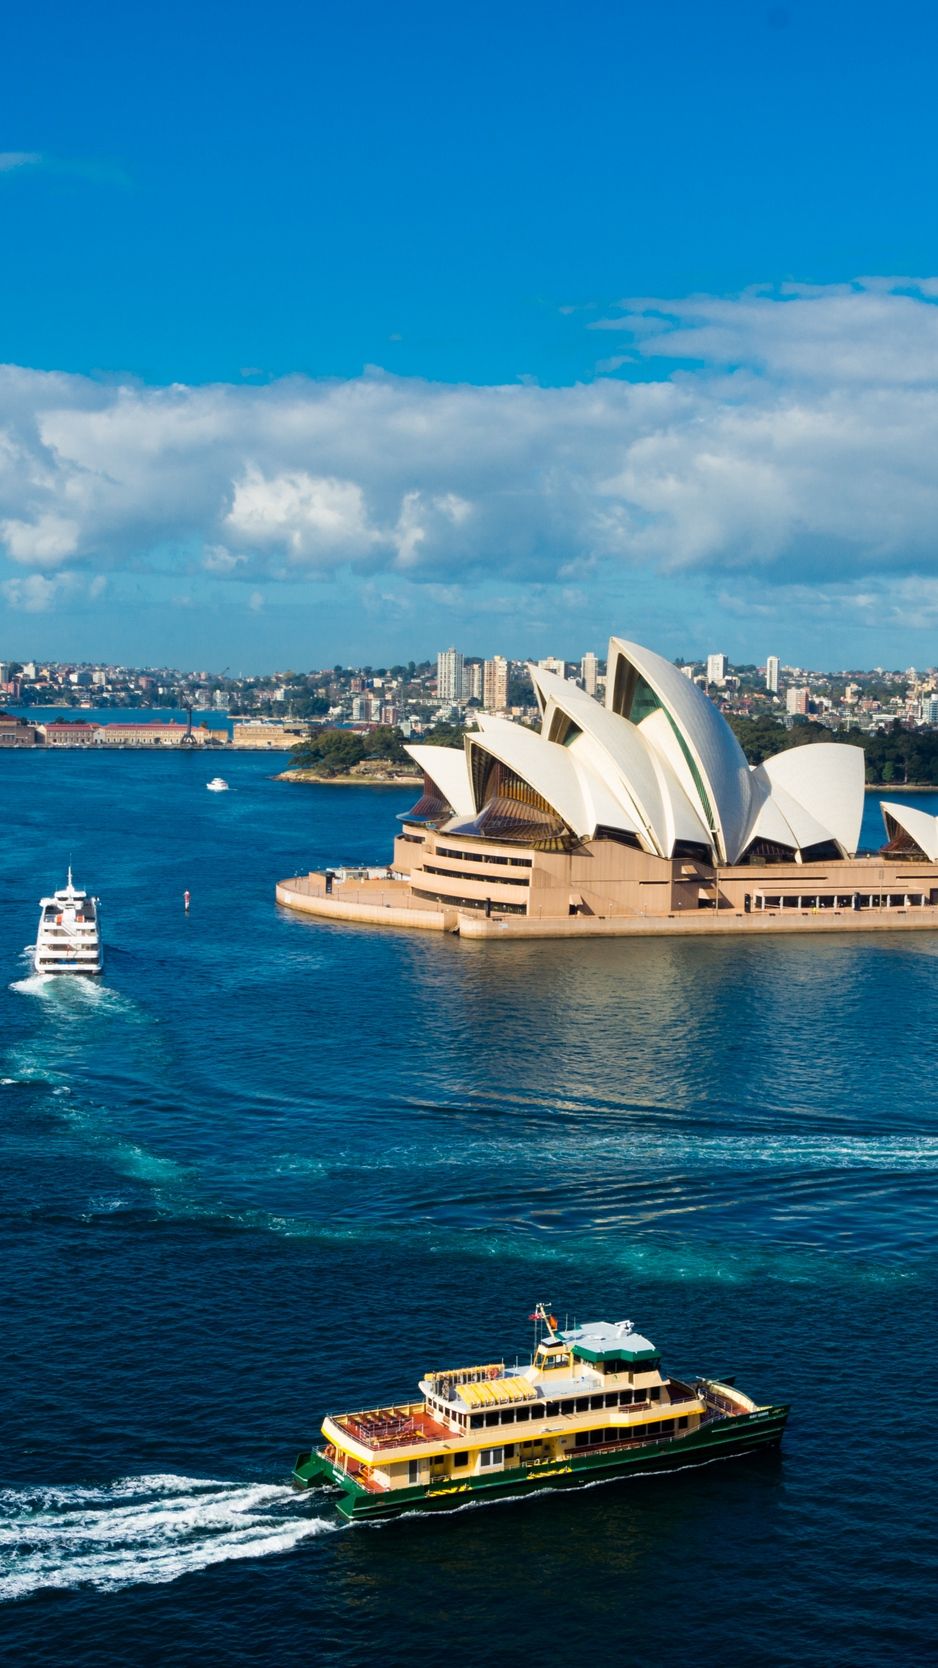 938x1668 Download Wallpaper 938x1668 Sydney Opera House Theater Harbor Ships Sydney Australia Iphone 8 7 6s 6 For Parallax Hd Background